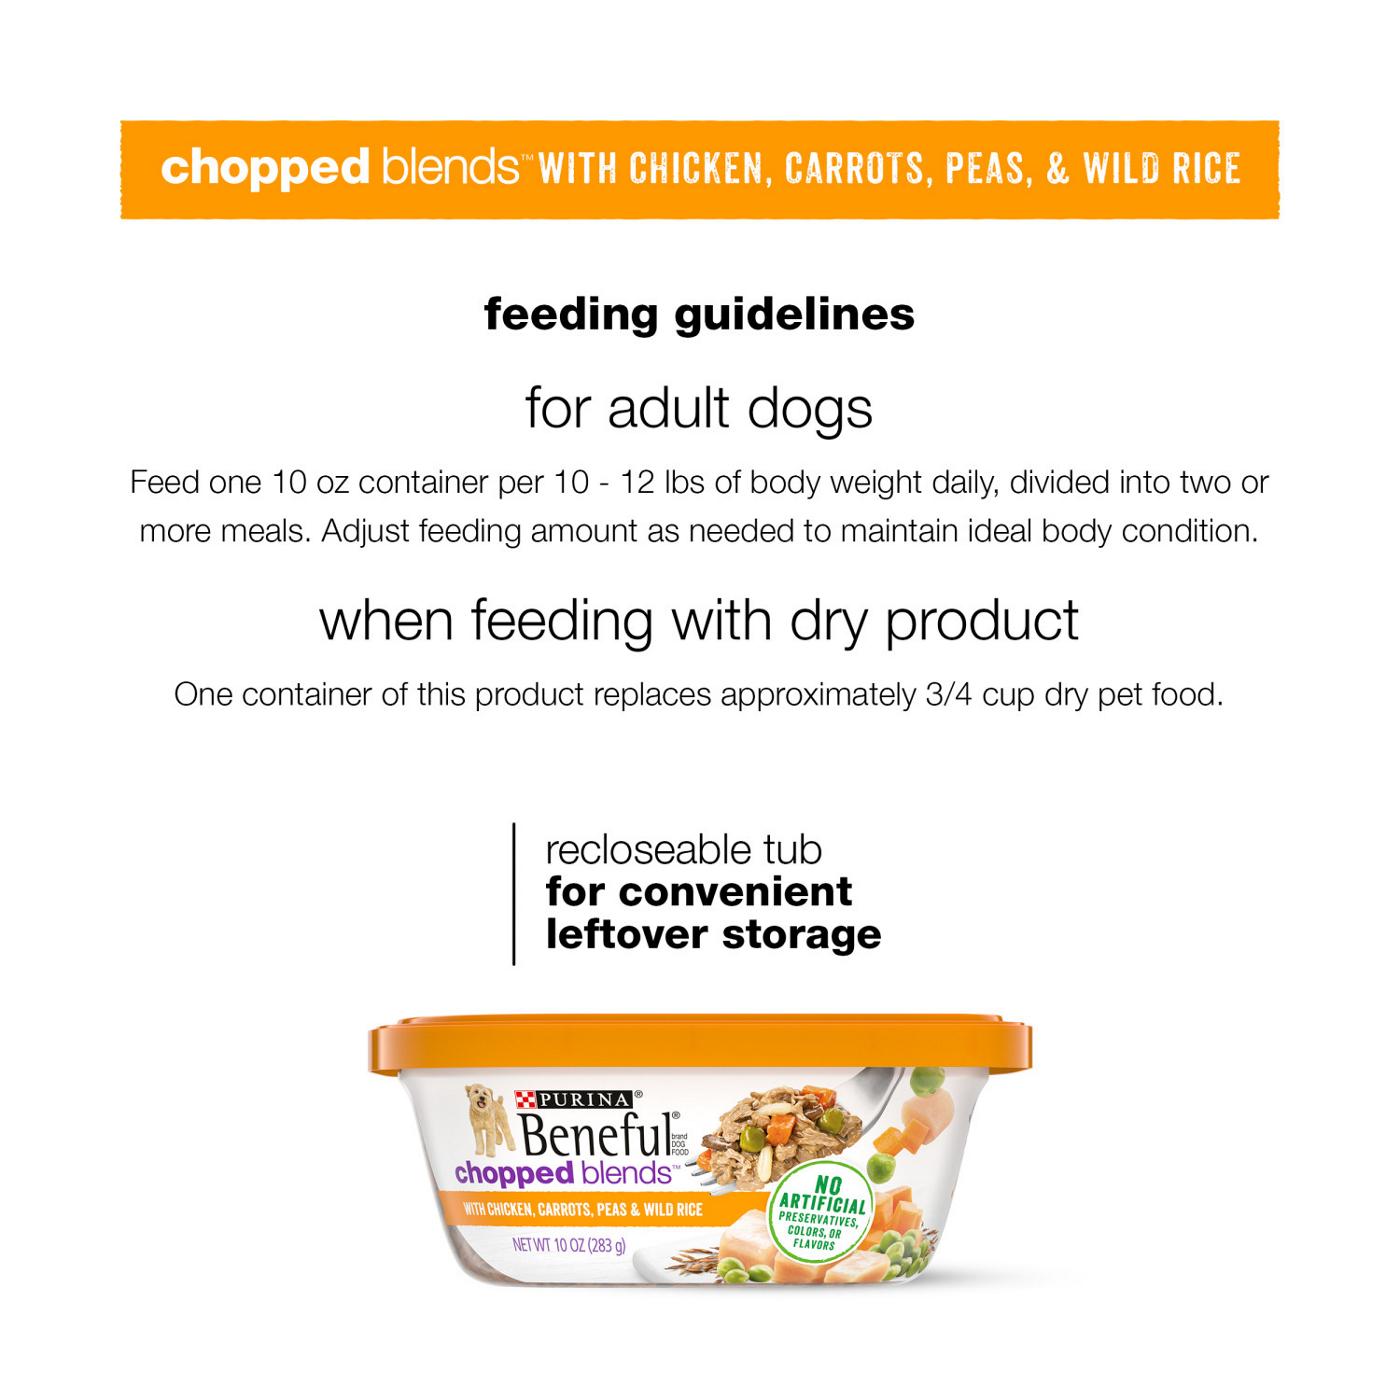 Beneful Purina Beneful Gravy, High Protein Wet Dog Food, Chopped Blends With Chicken; image 5 of 8